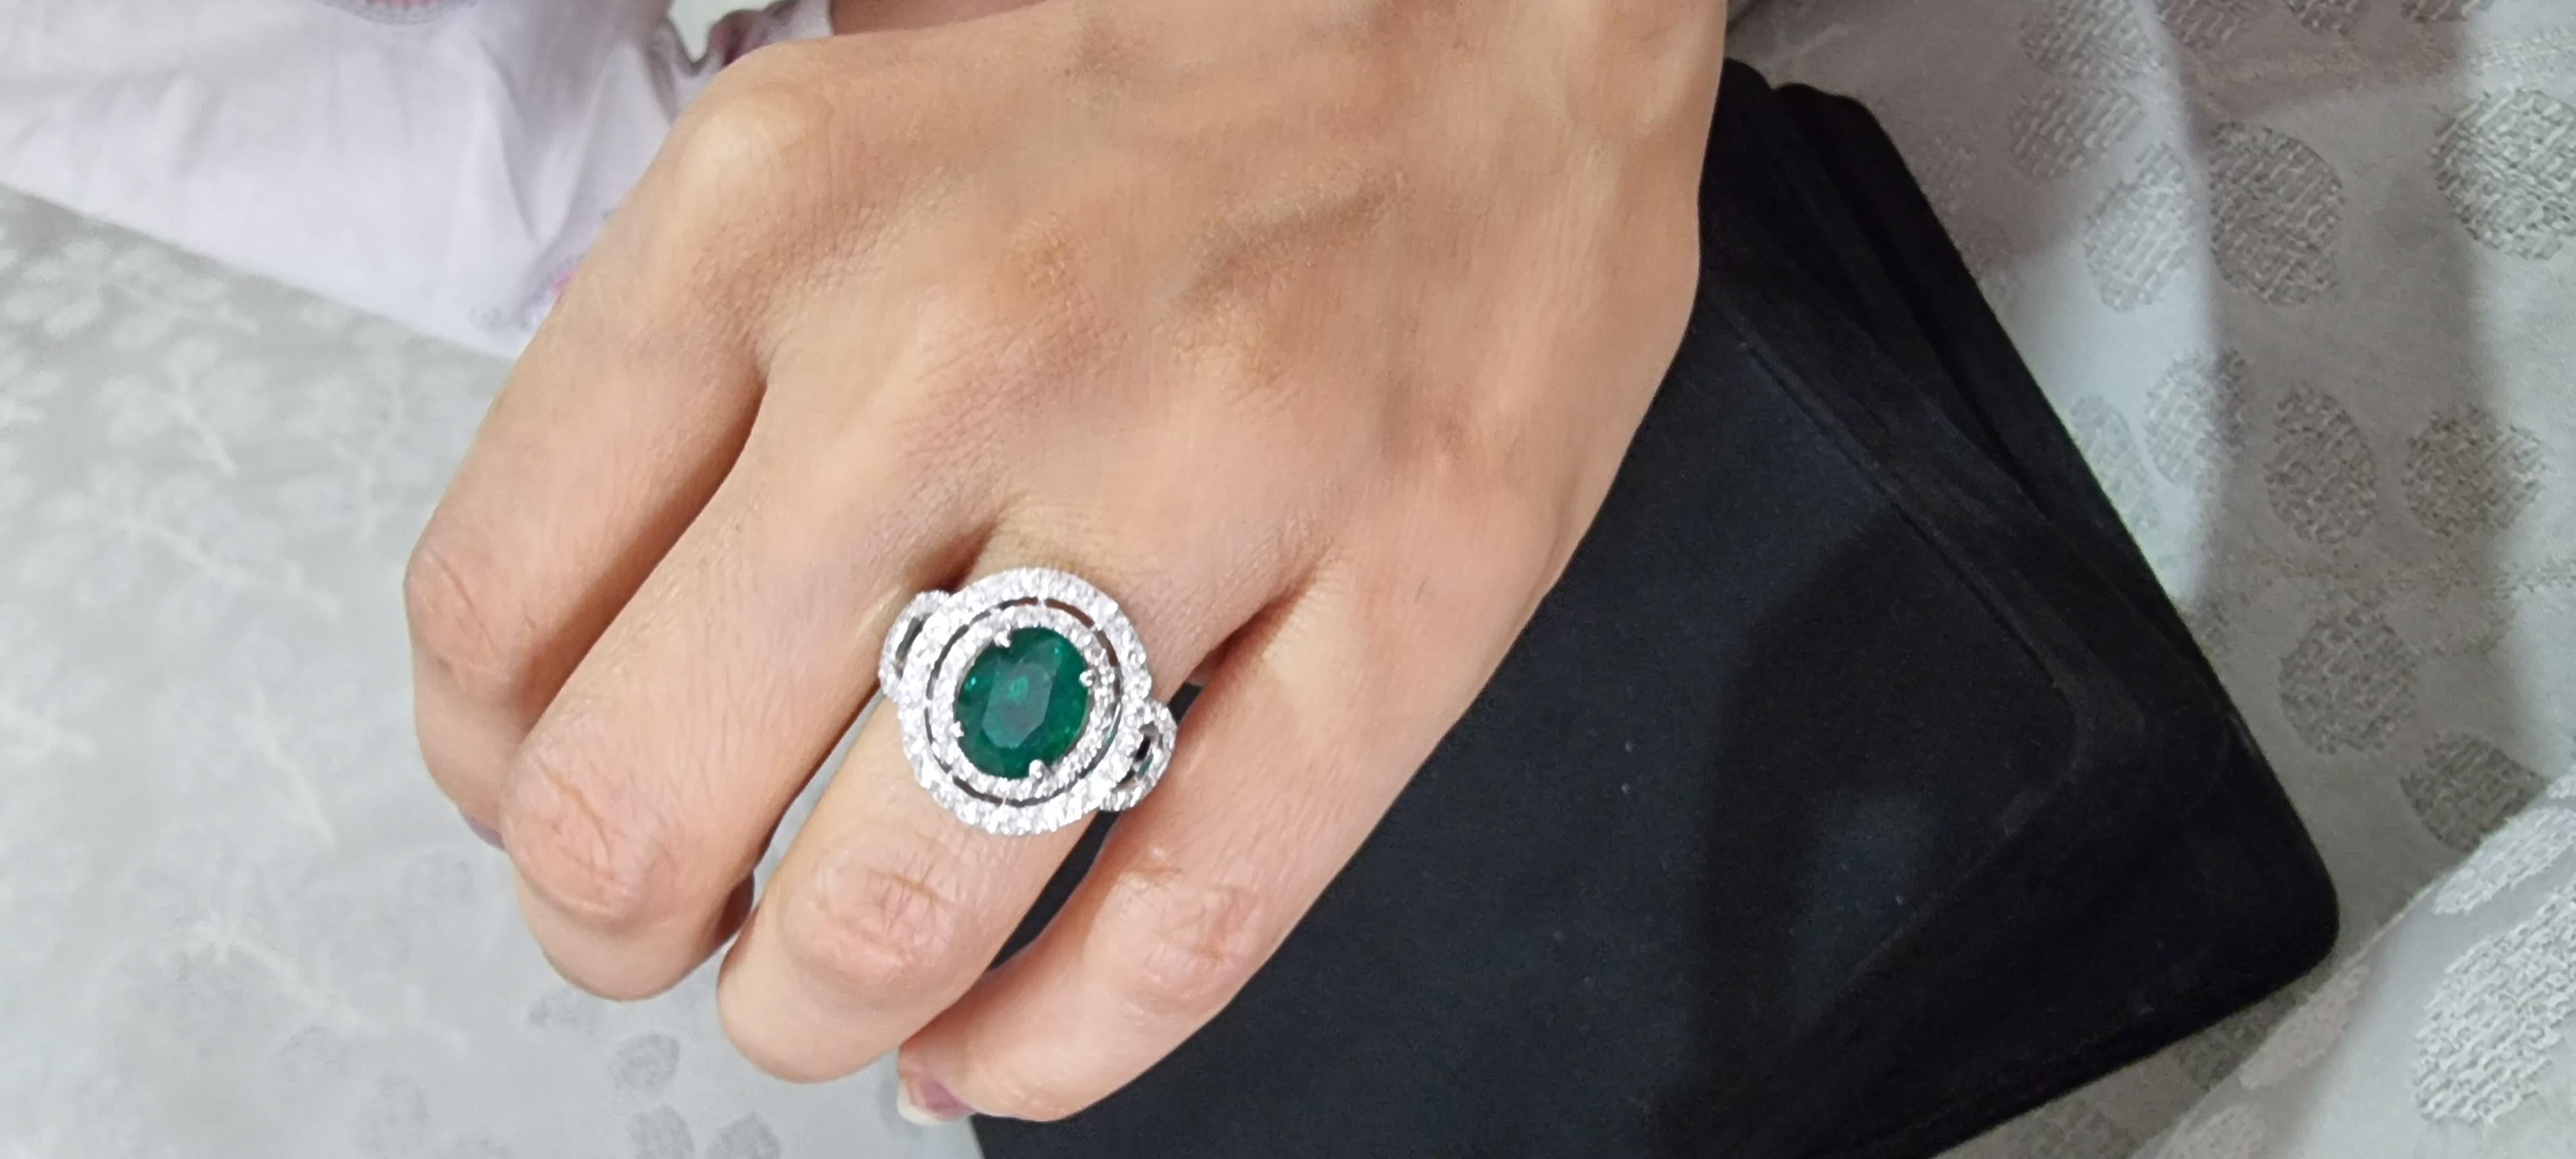 3.36 Carats Natural Zambian Emerald Ring with 1.01 Carats Diamonds and 14k Gold For Sale 1